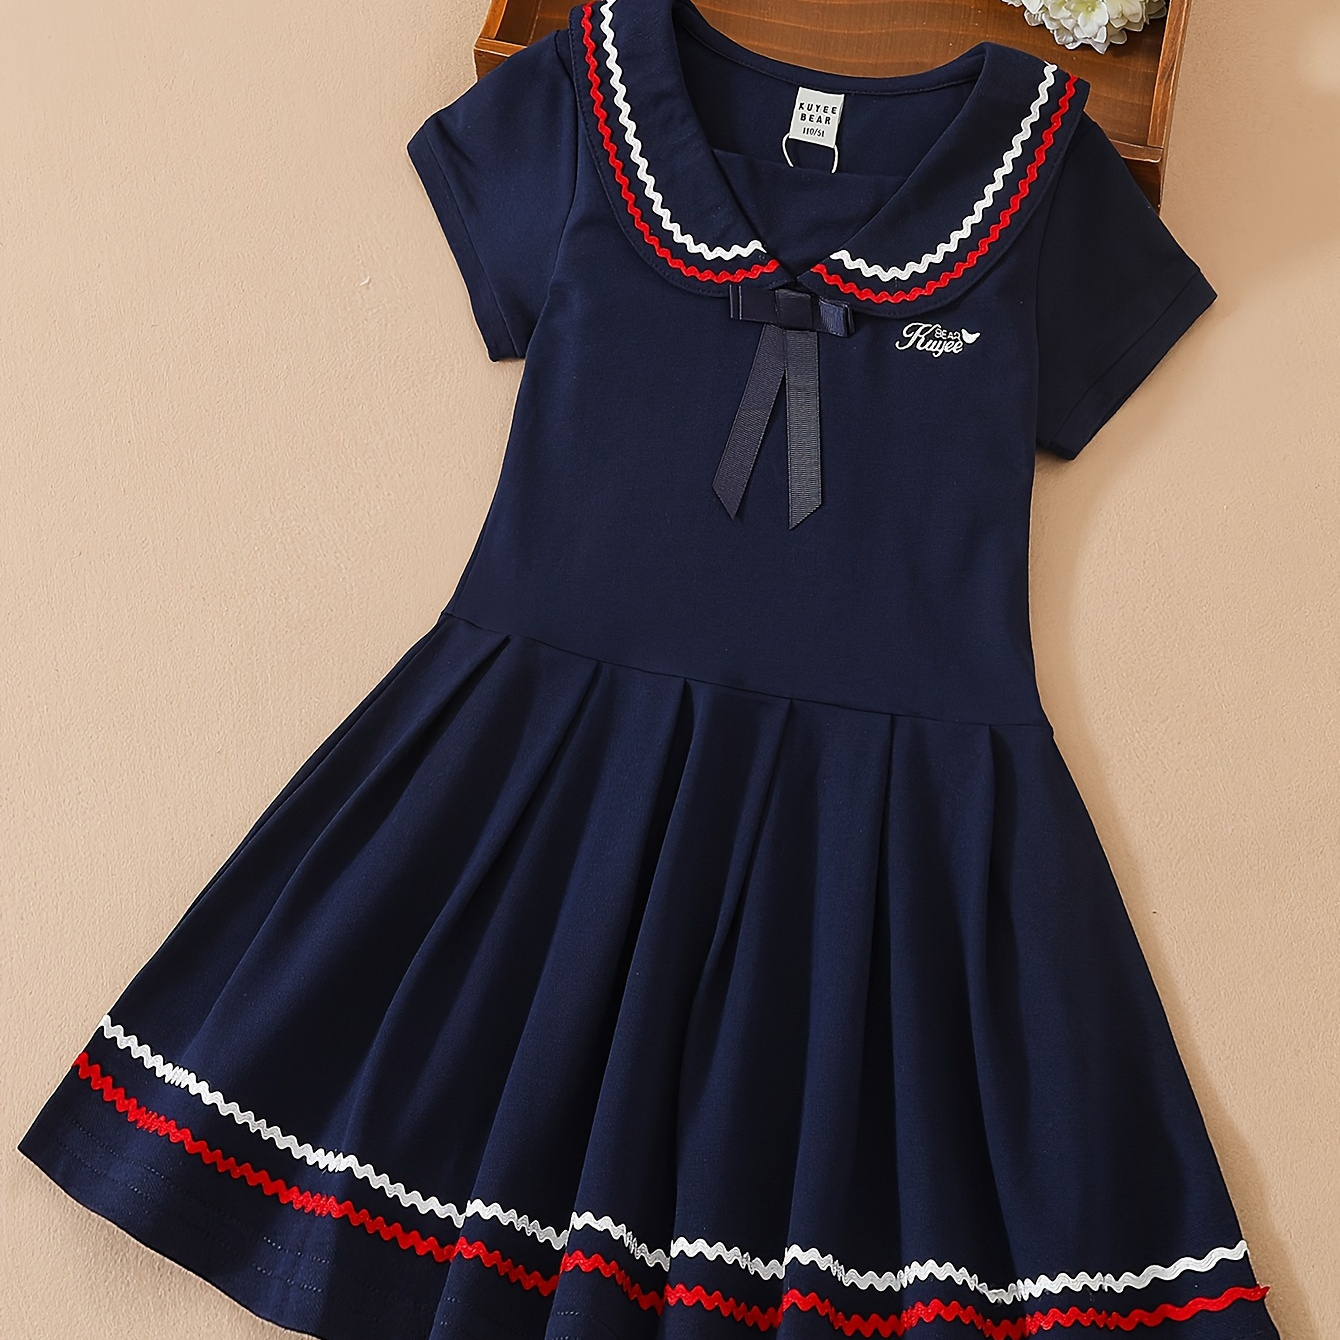 

Girls' Navy Pleated Dress With Contrast Trim And Bow Detail, Cotton Preppy Style Summer Uniform, Korean Fashion Doll Collar, Kids Sizes